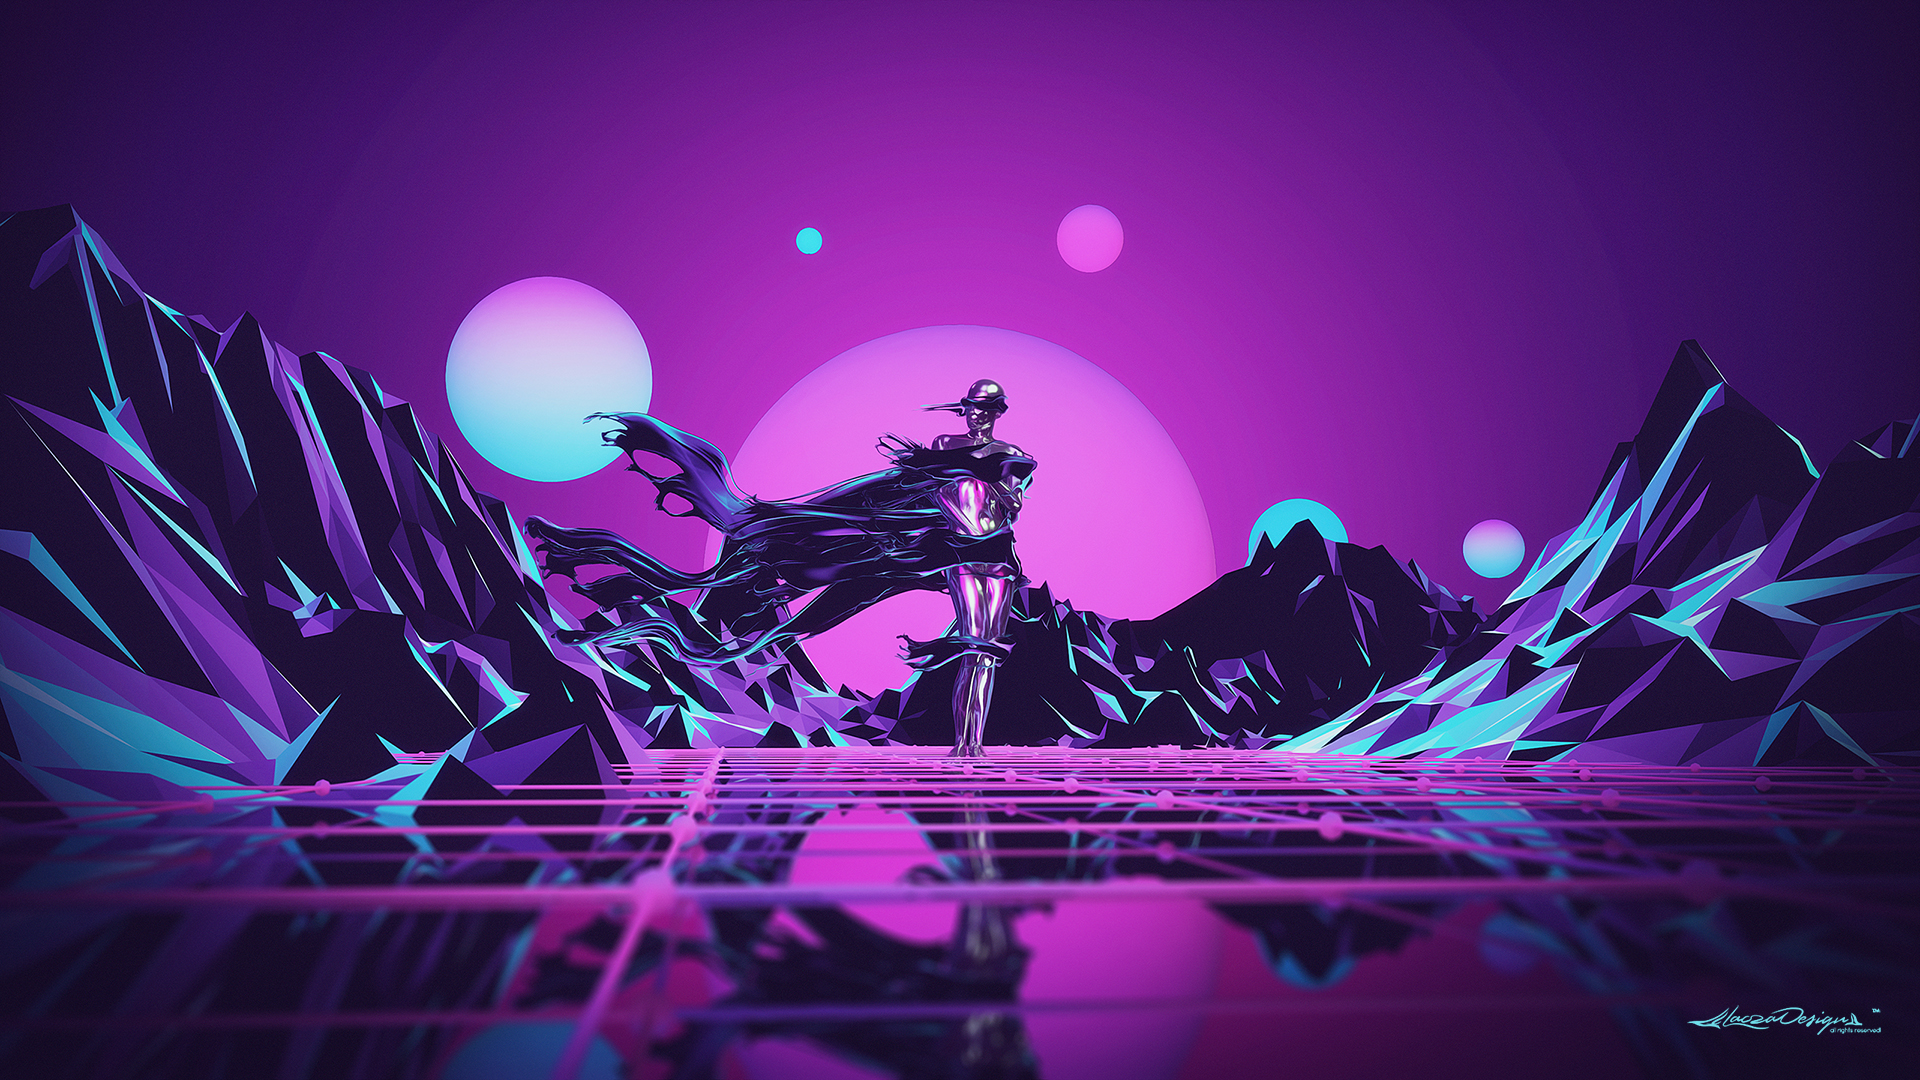 Wallpaper, abstract, Lacza, low poly, Retro style 1920x1080